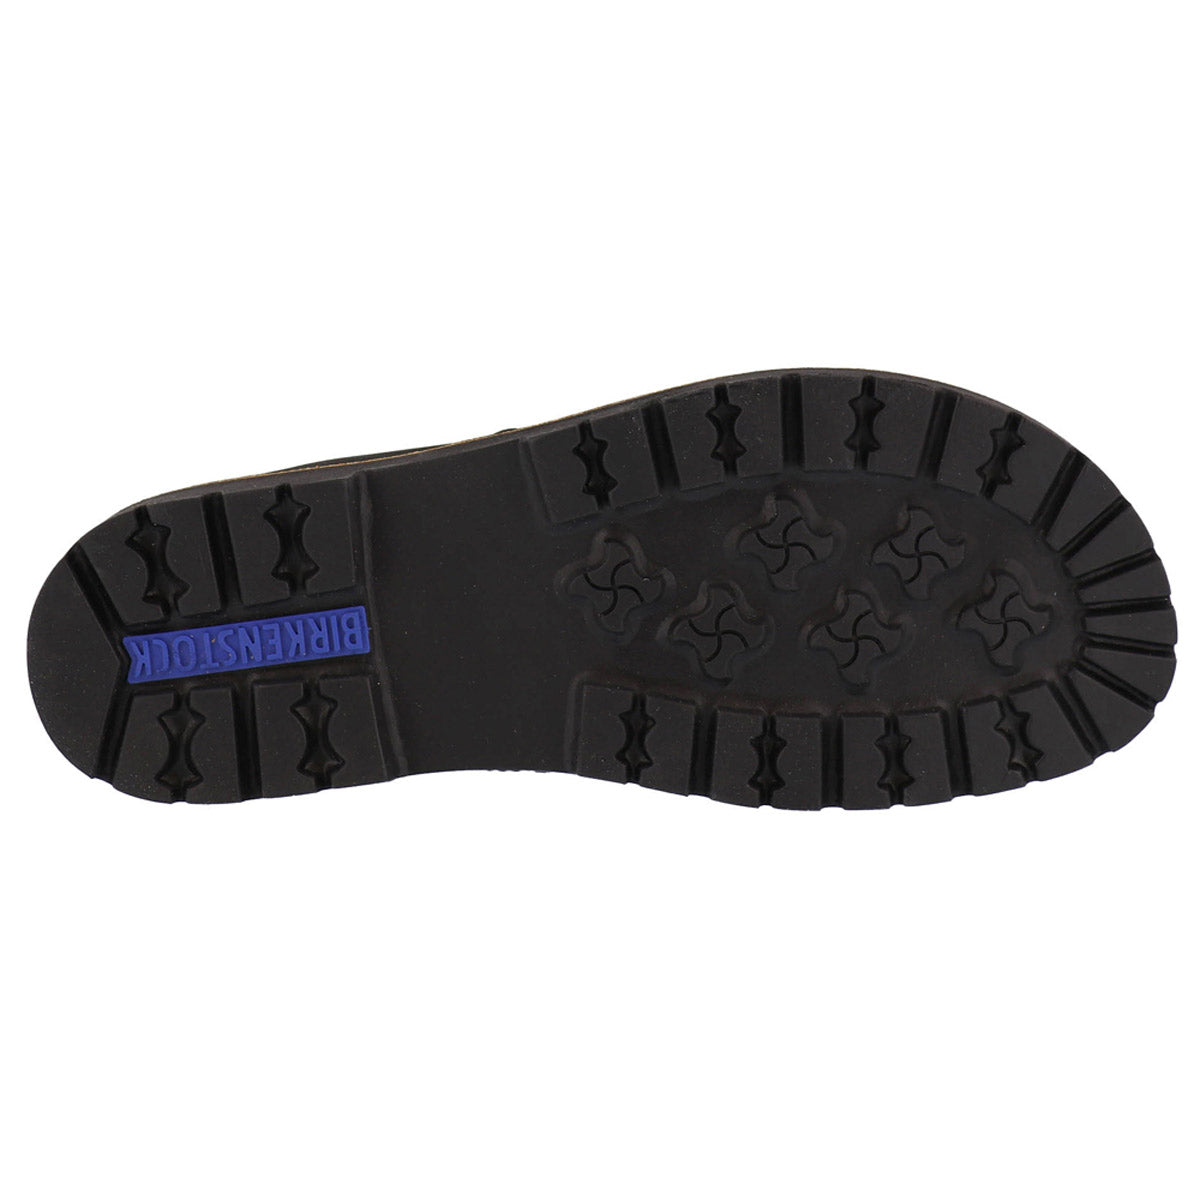 Black shoe sole with textured treads and a &#39;Birkenstock&#39; logo, featuring an oiled nubuck leather upper.